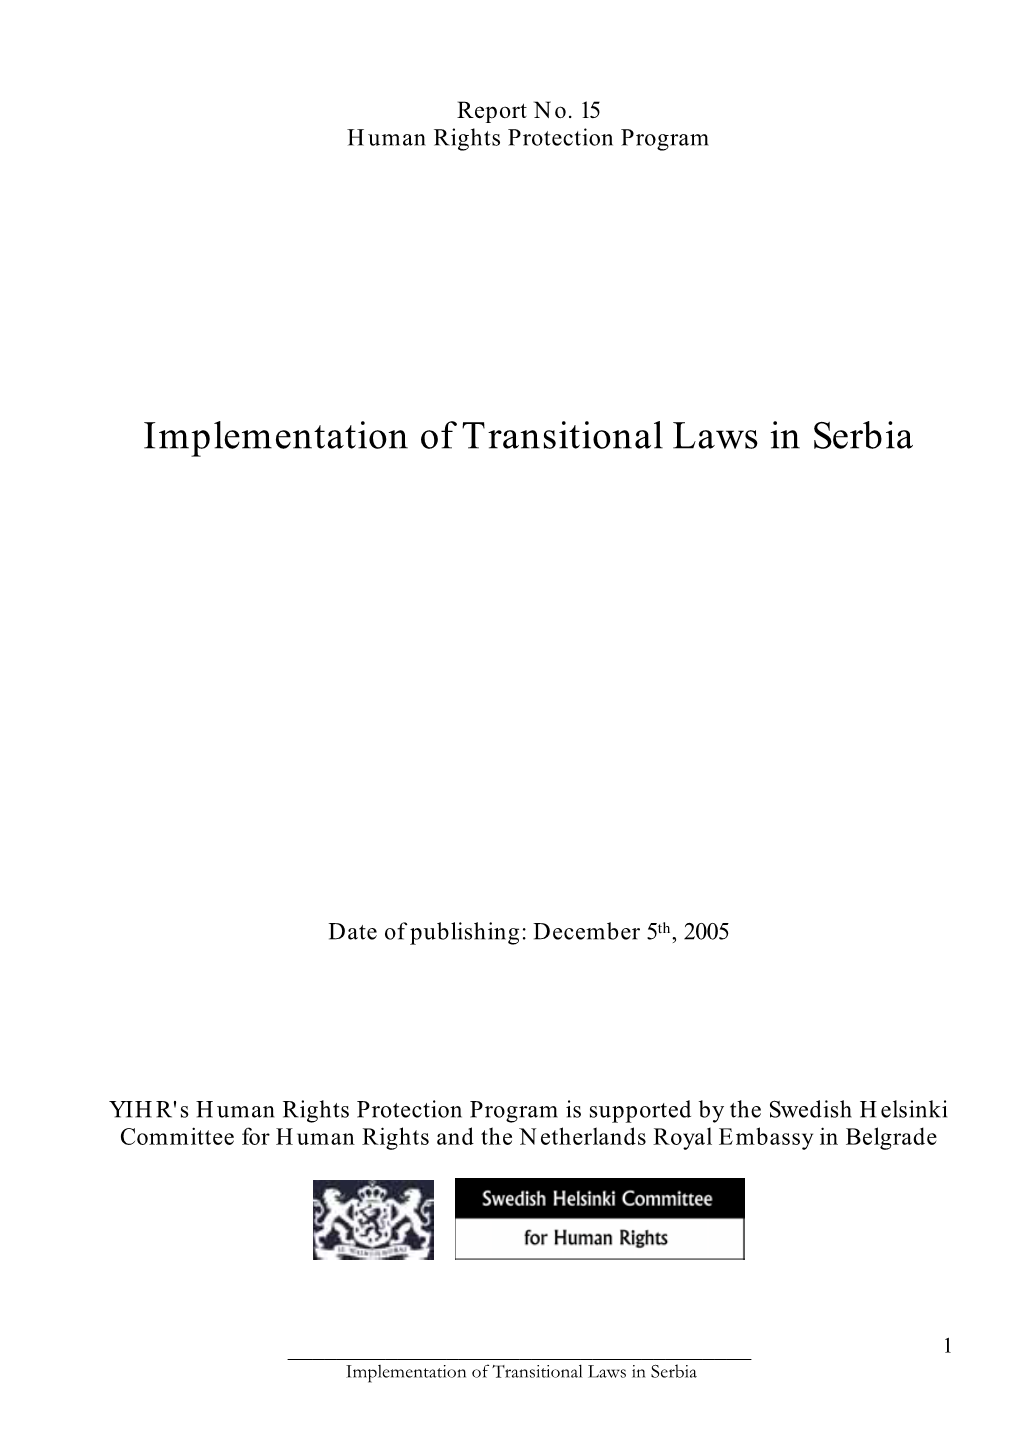 Implementation of Transitional Laws in Serbia